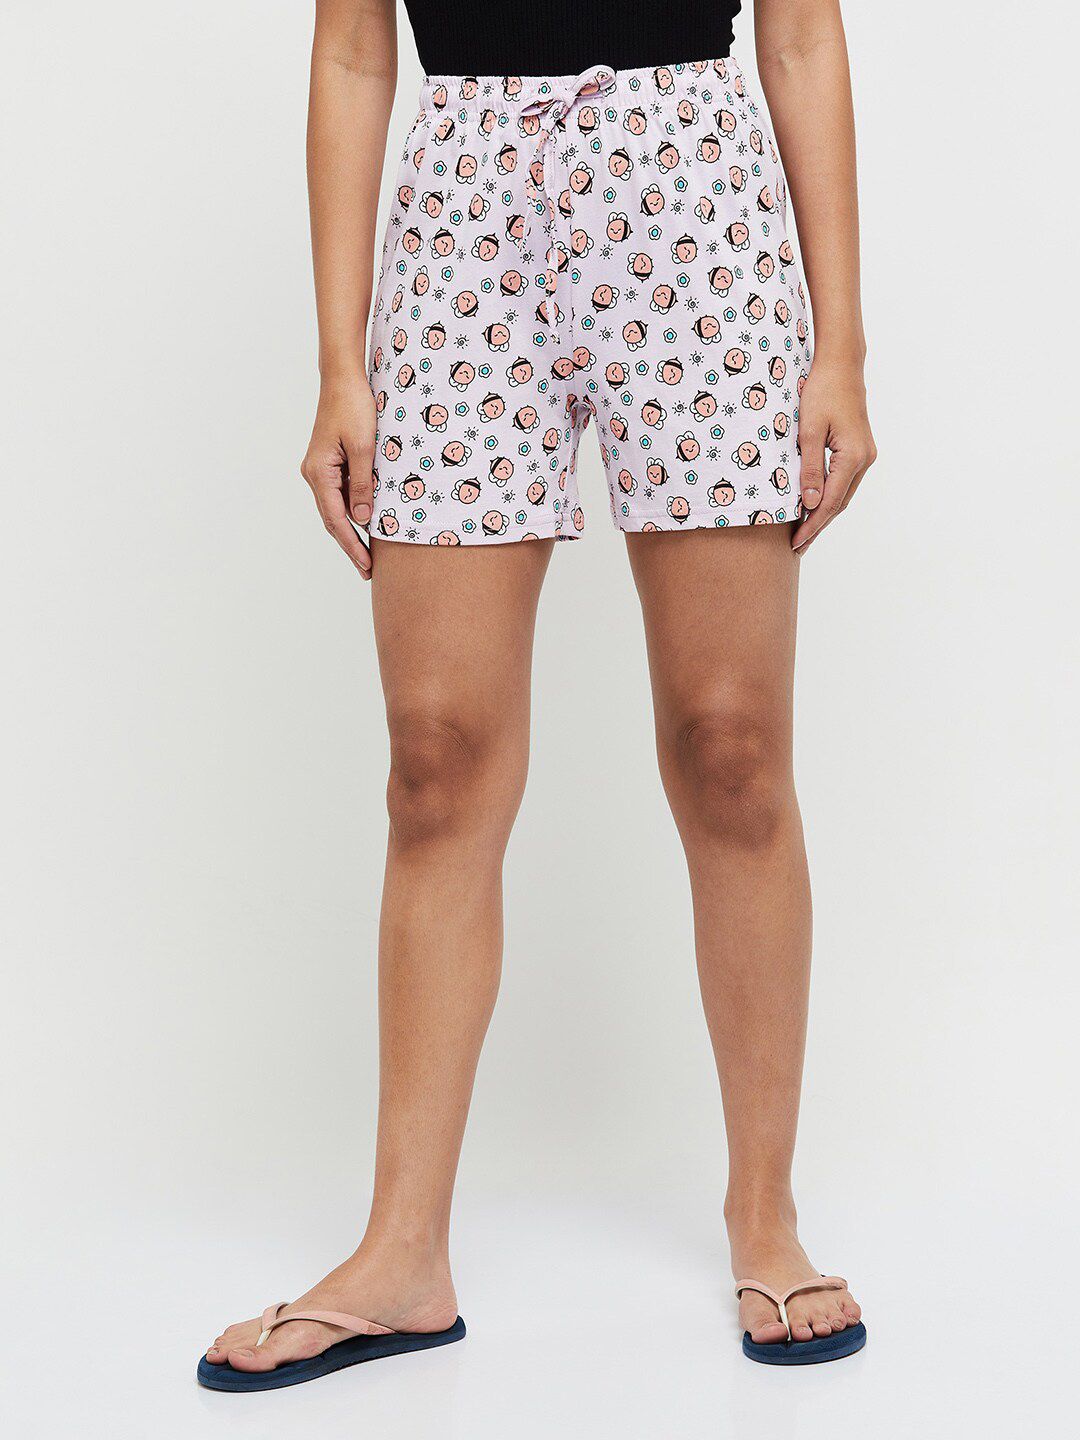 max Women Purple & Peach-Coloured Printed Lounge Shorts Price in India